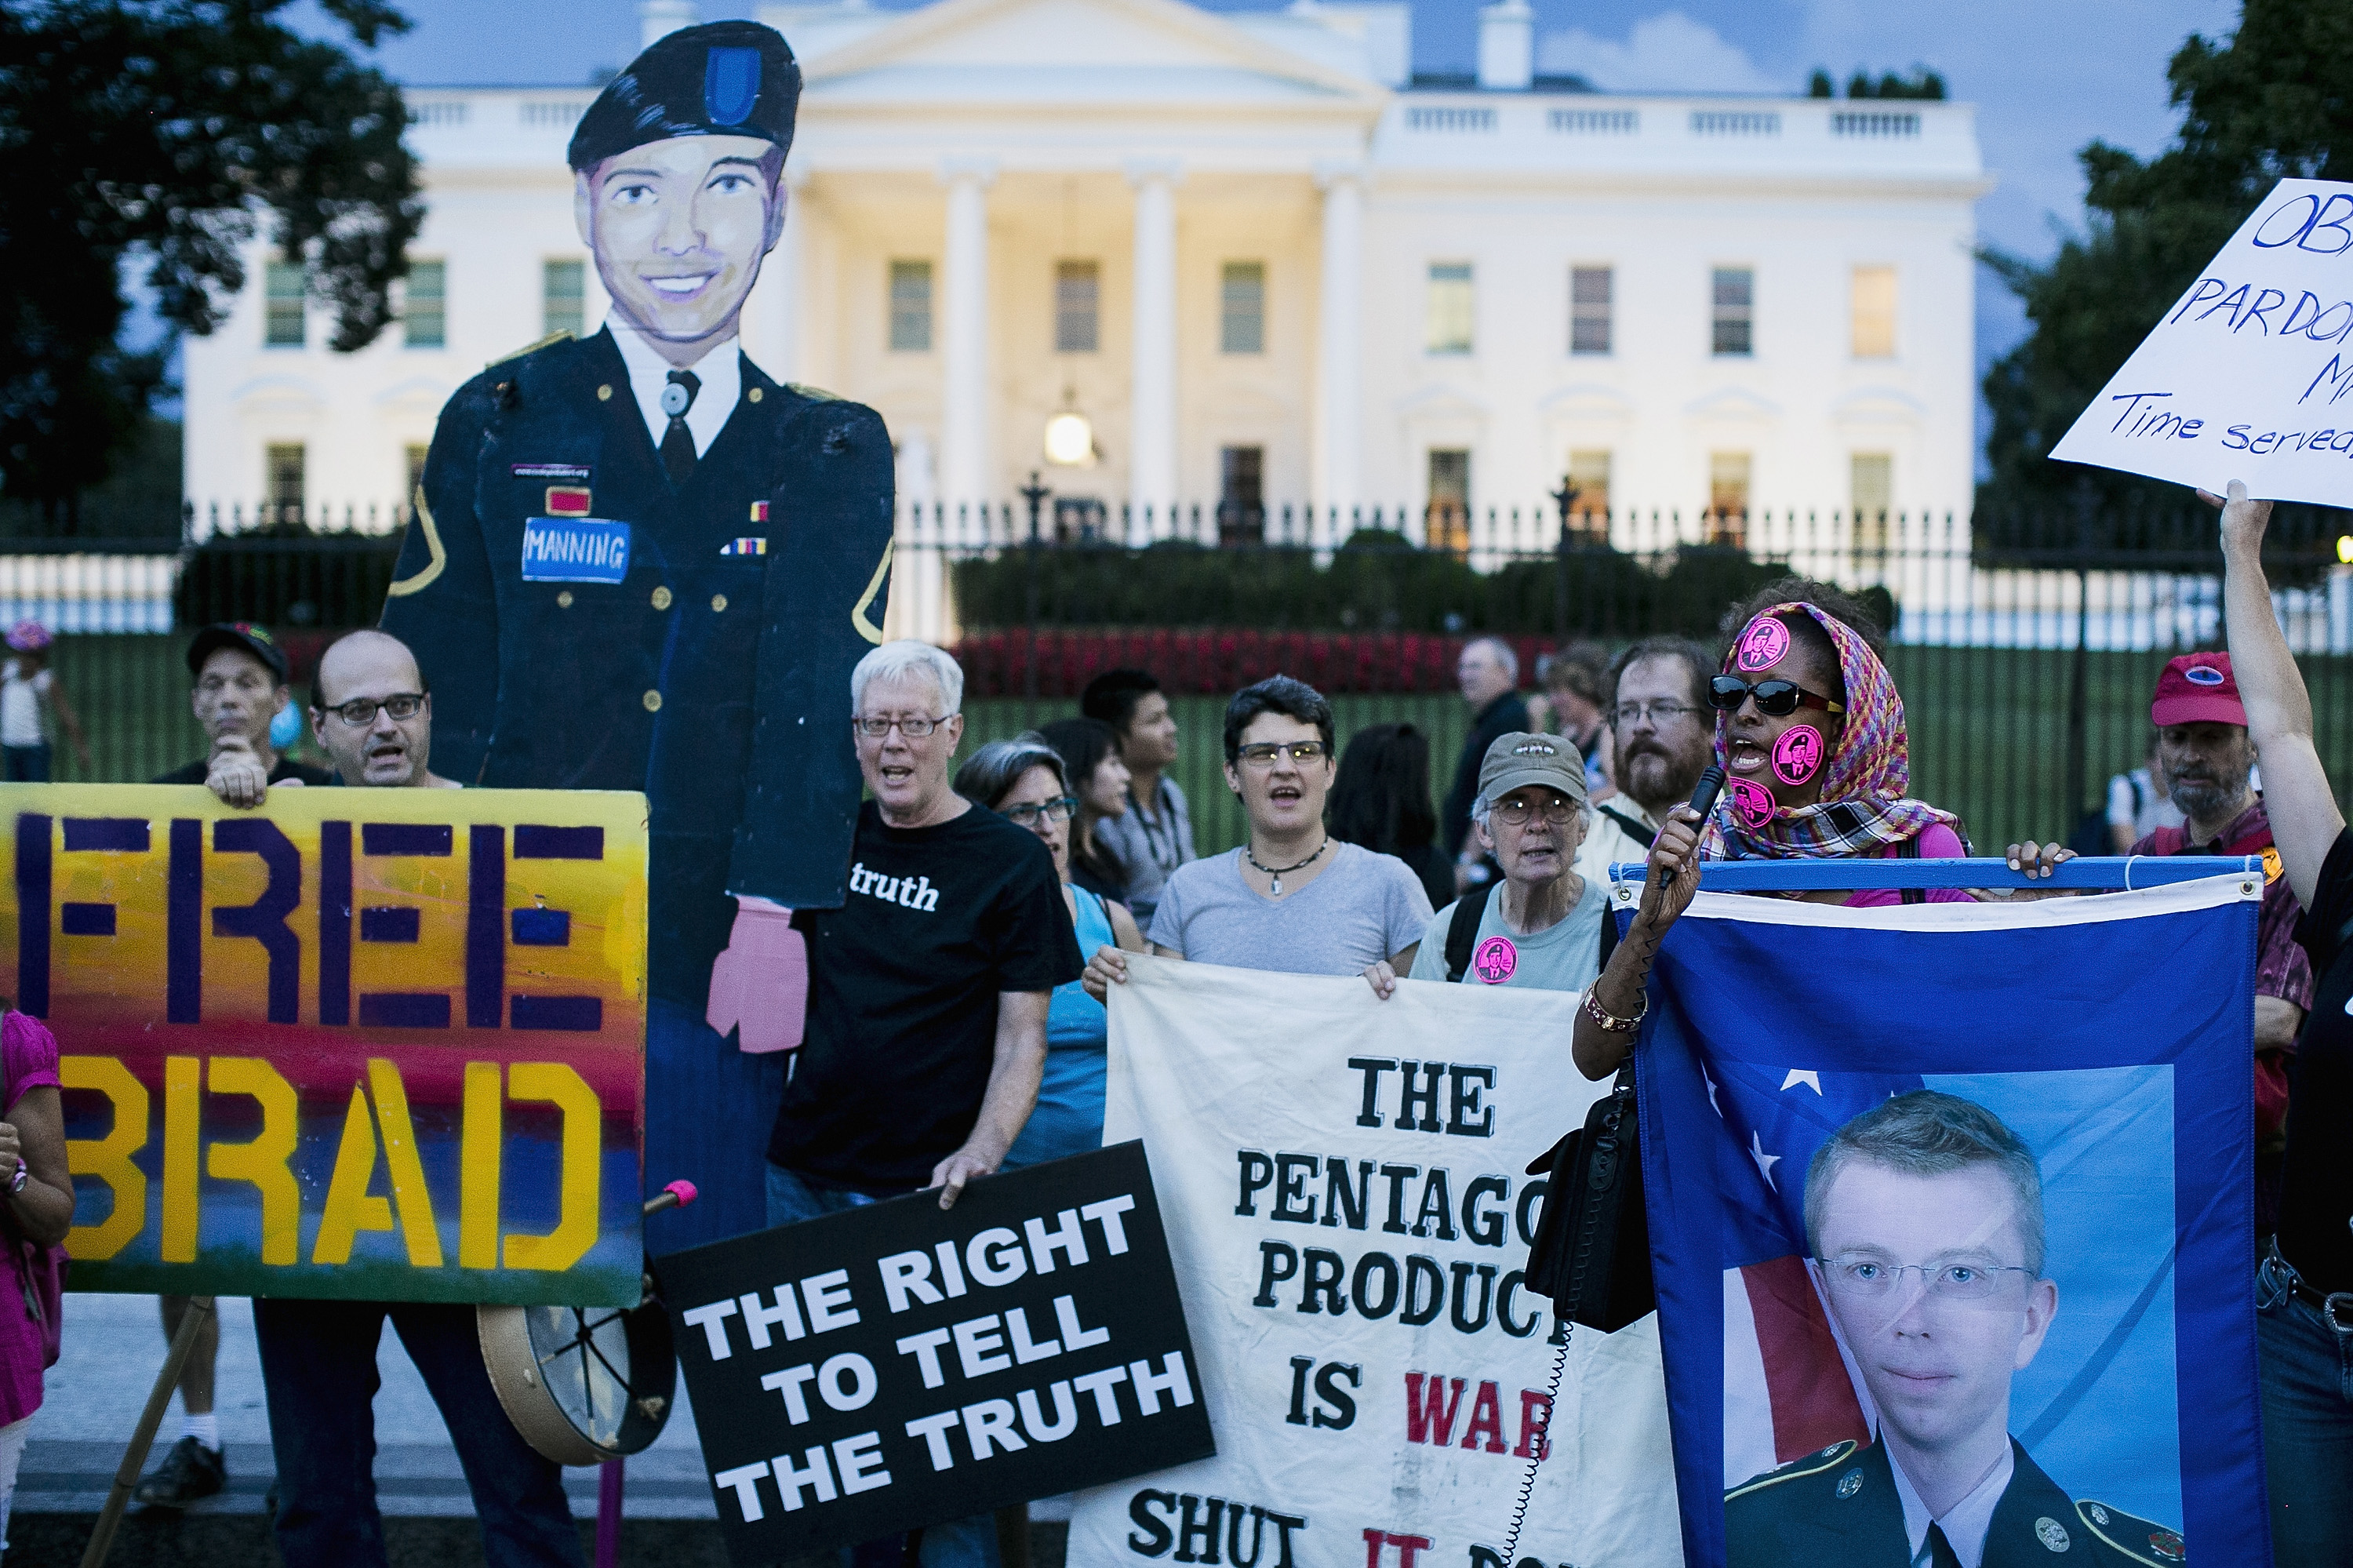 Protesters demonstrate in support of Bradley Manning on August 21, 2013 in front of the White House in Washington, DC. (T.J. Kirkpatrick—Getty Images)